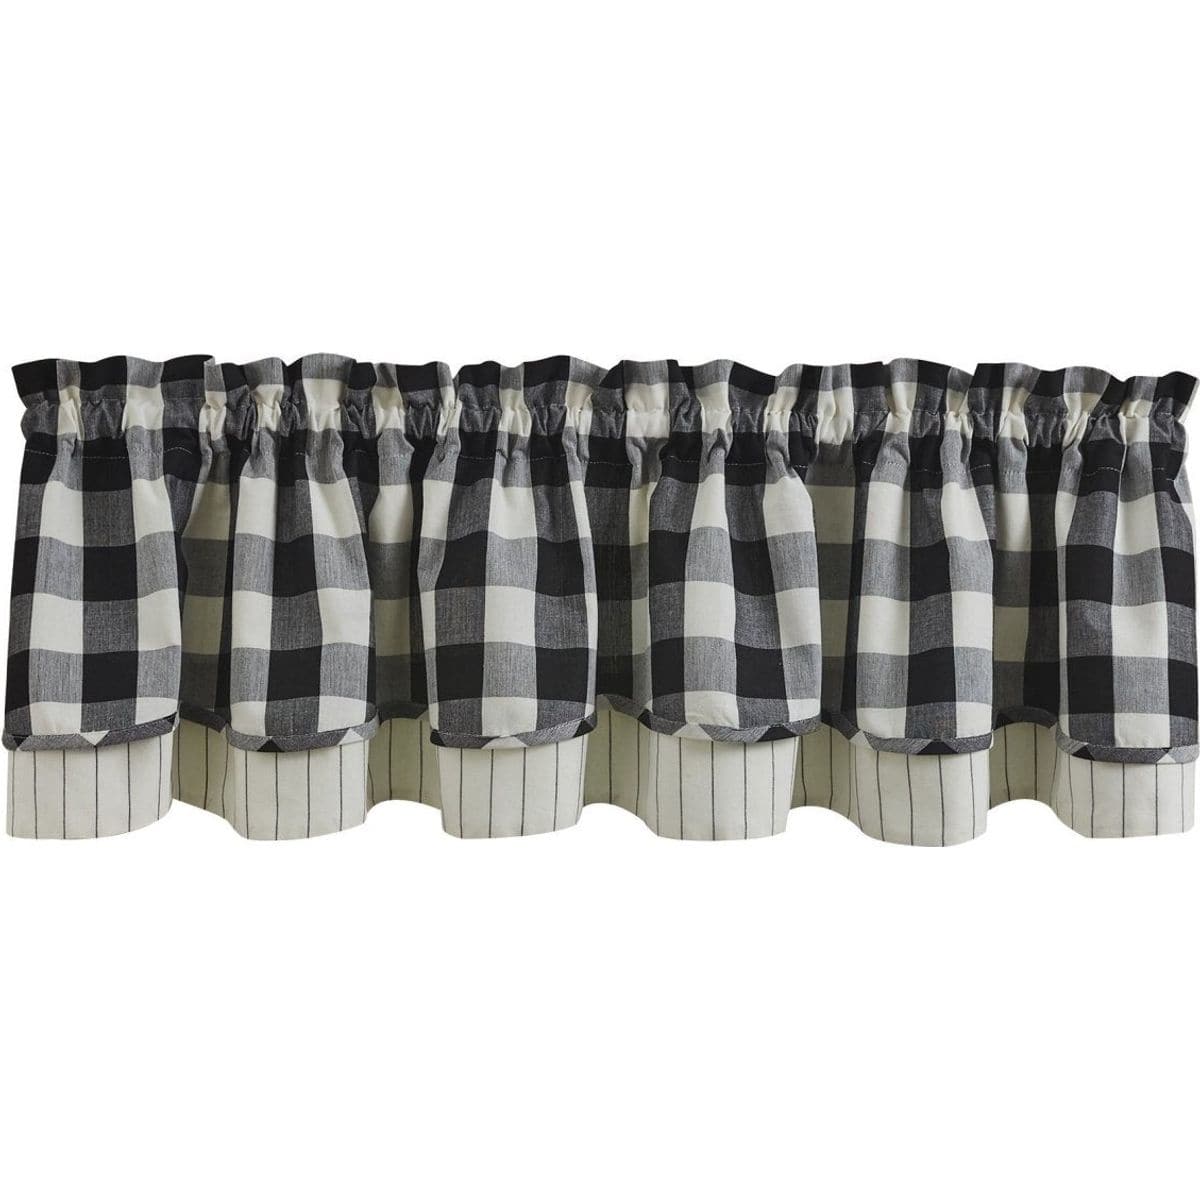 Wicklow Check in Black &amp; Cream Layered Valance Lined-Park Designs-The Village Merchant